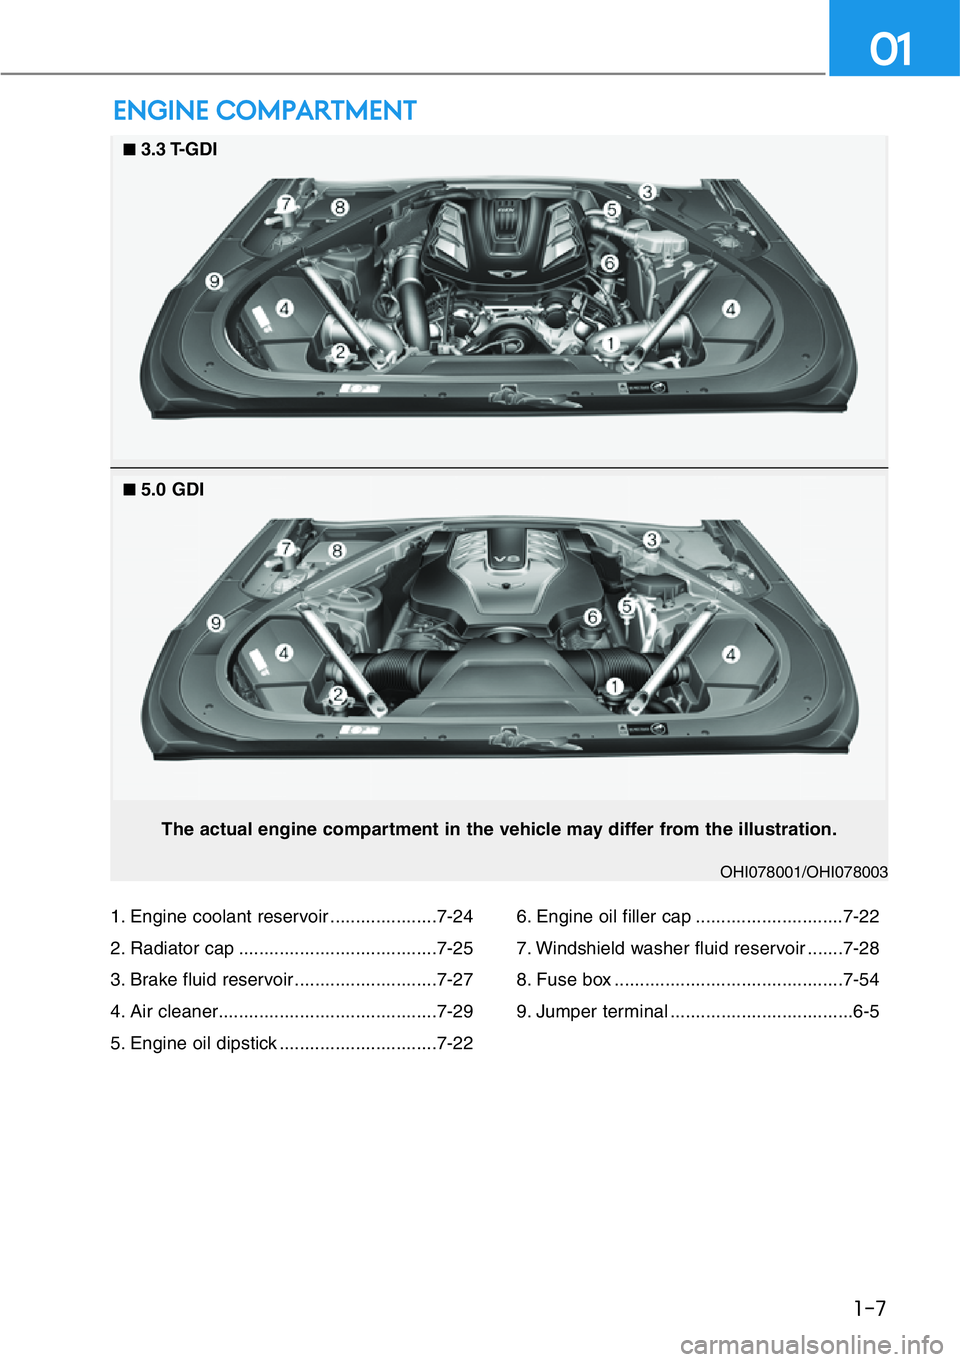 HYUNDAI GENESIS G90 2020  Owners Manual ENGINE COMPARTMENT
OHI078001/OHI078003
The actual engine compartment in the vehicle may differ from the illustration.
1-7
01
1. Engine coolant reservoir .....................7-24
2. Radiator cap .....